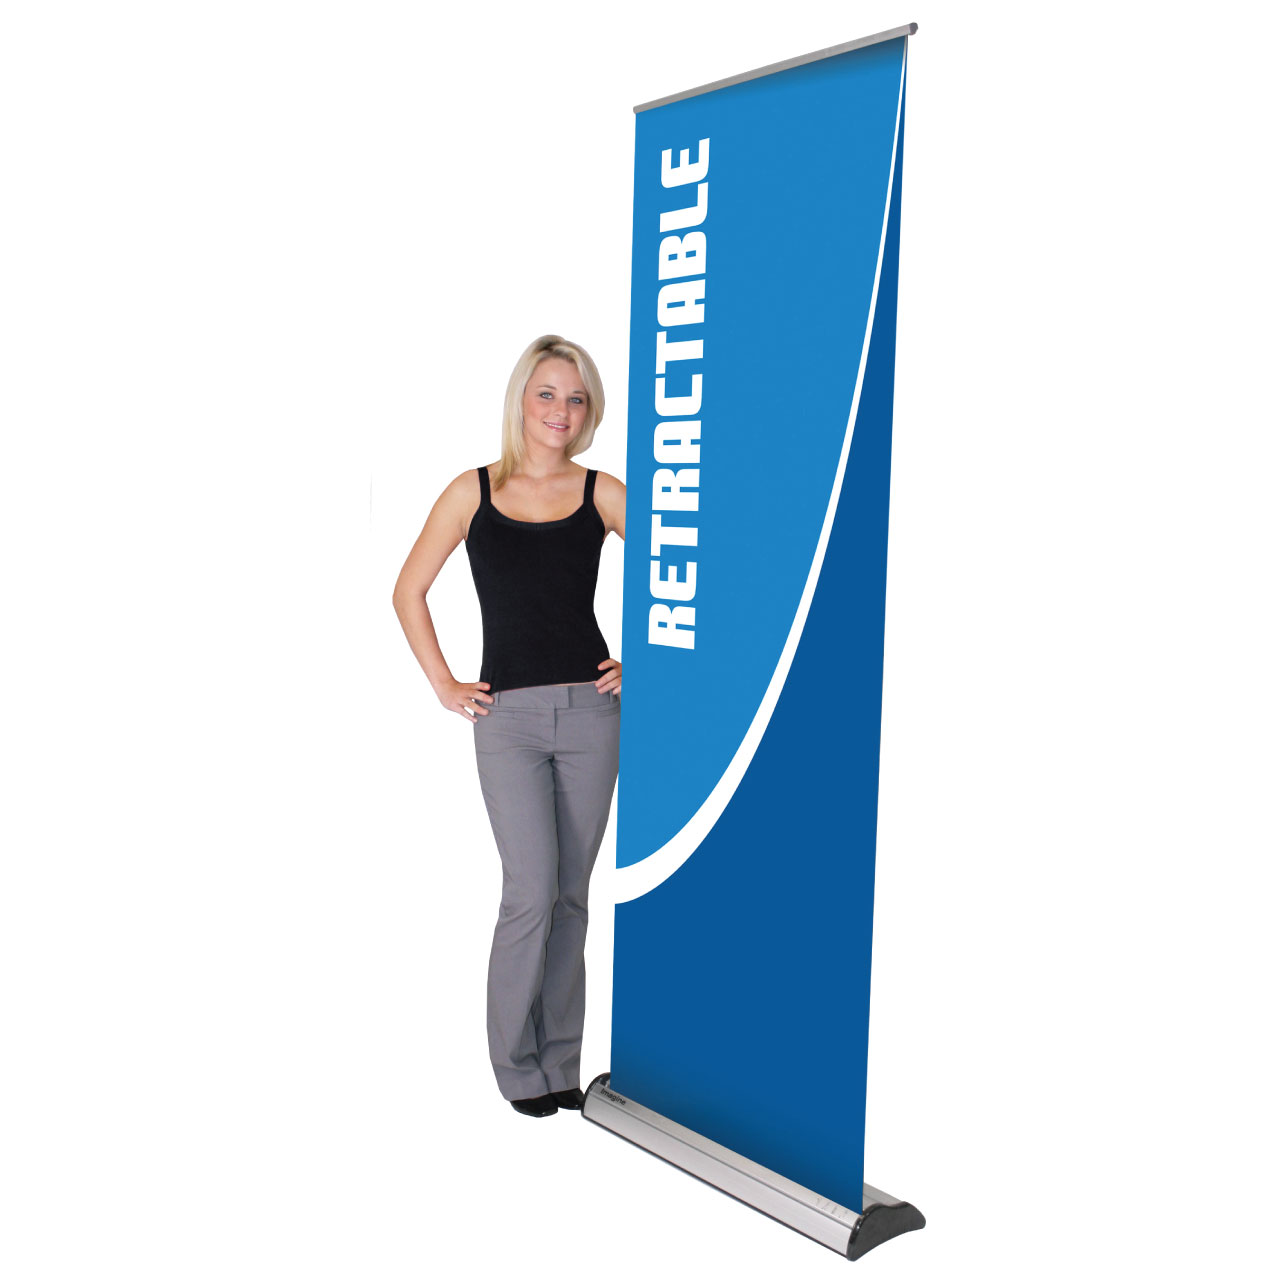 Retractable banners are portable and effective. Combine with a graphic image for maximum pop!